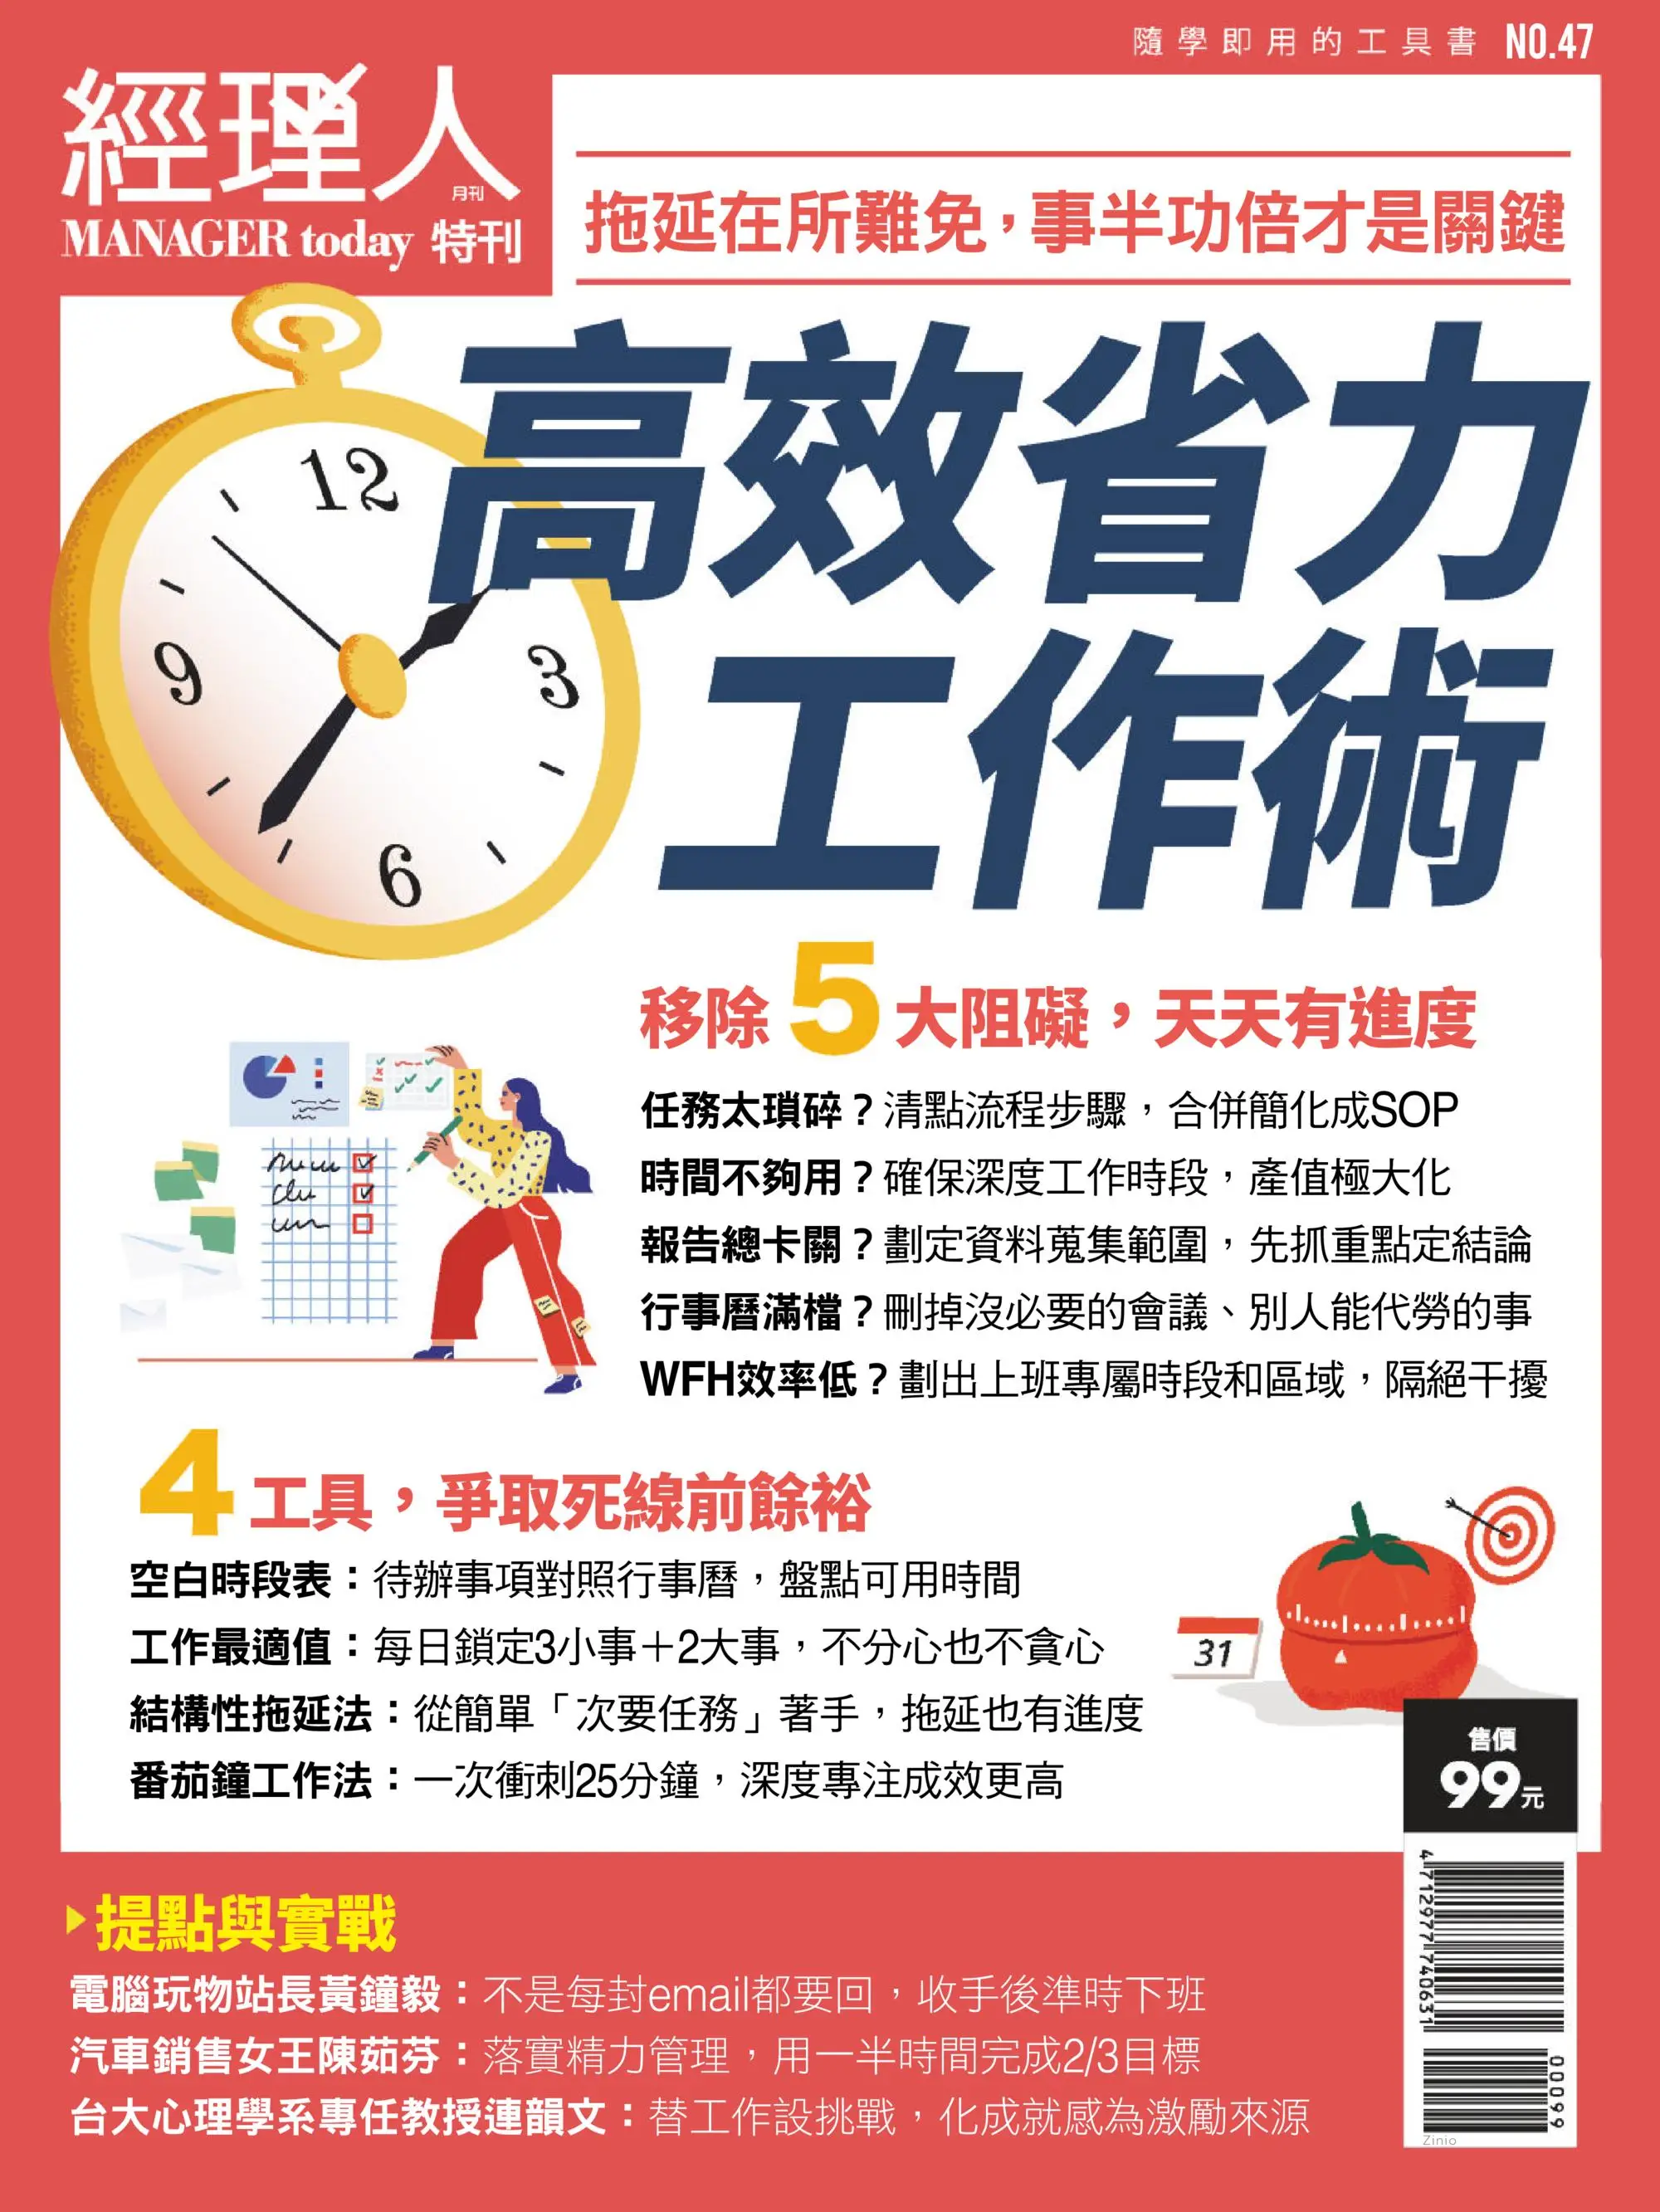 Manager Today Special Issue 經理人. 主題特刊 - 三月 16, 2022